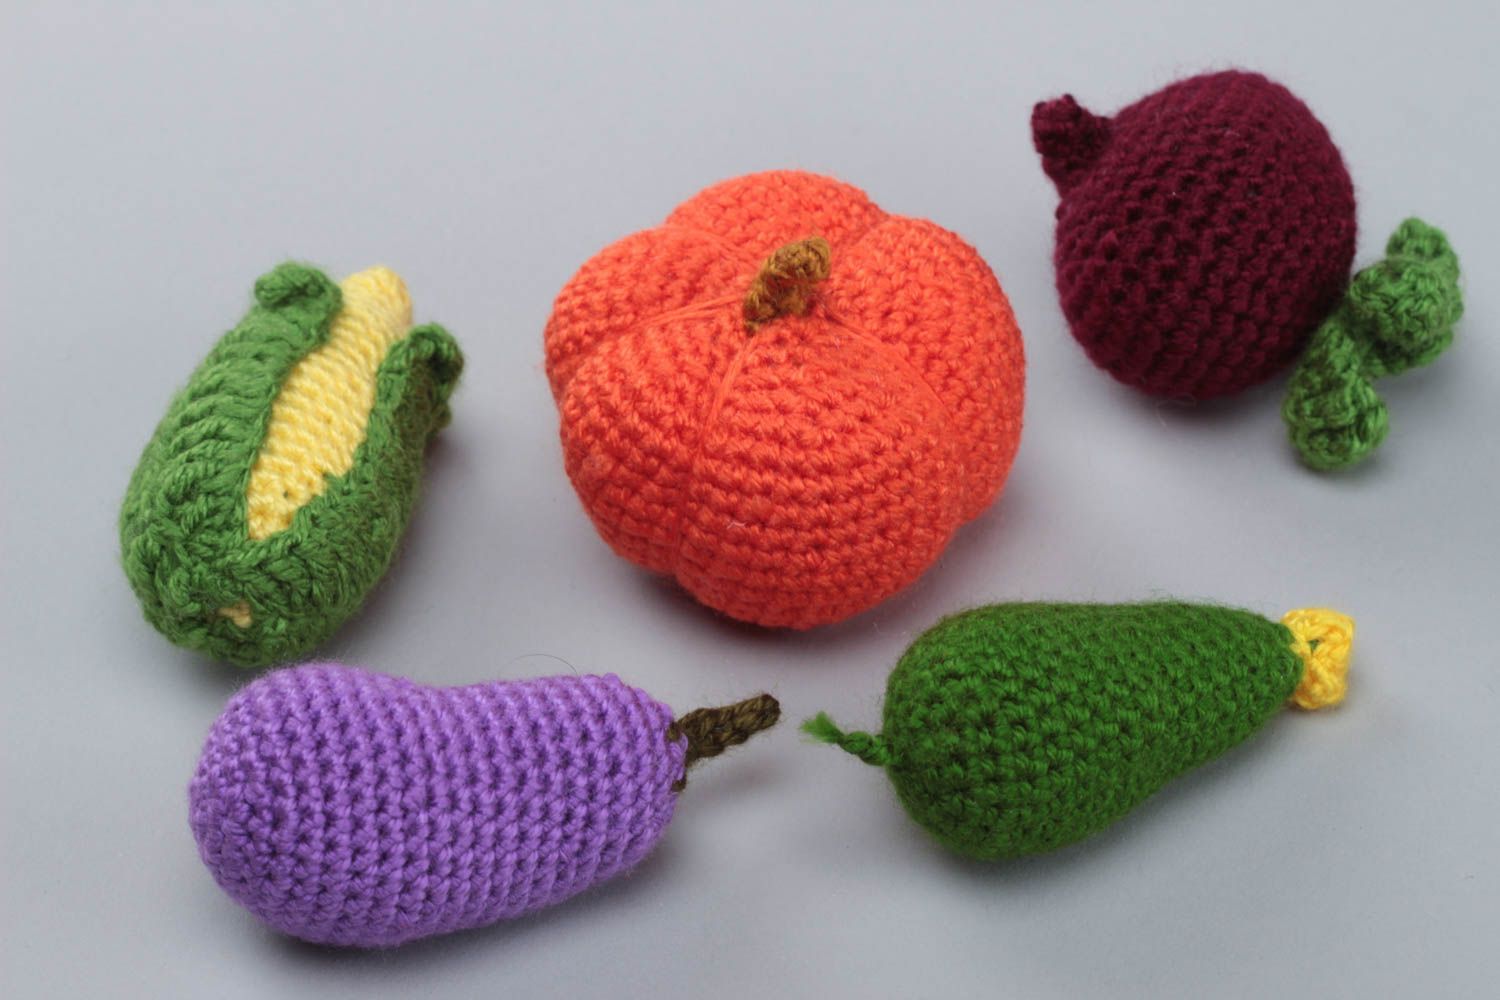 Set of 5 handmade acrylic crochet colorful soft toys vegetables for kids and decor photo 2